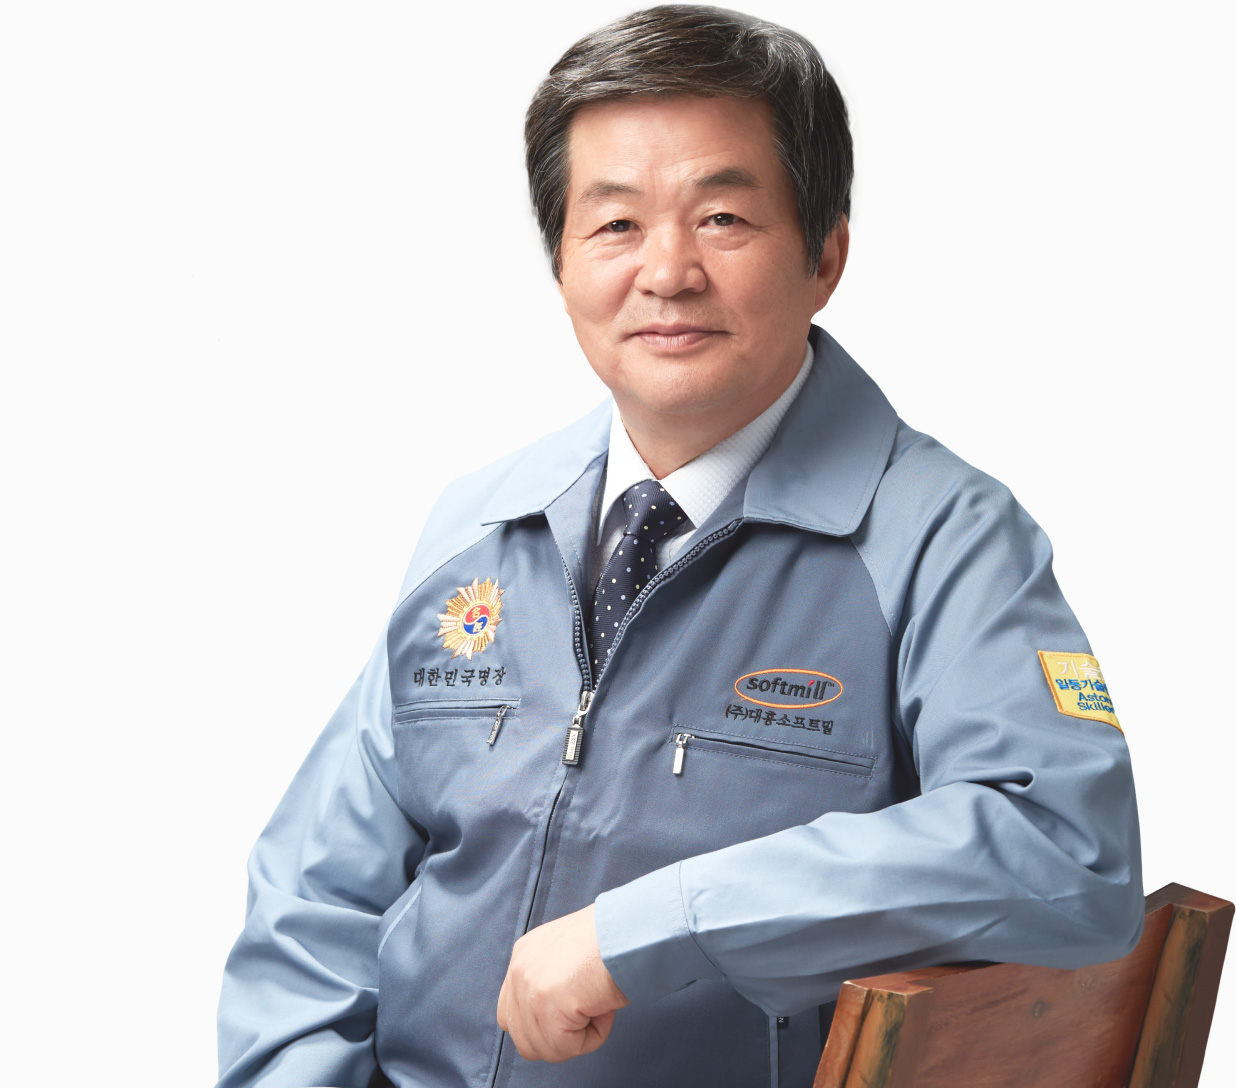 CEO of Daeheung Soft Mill 'Kim Dae-in' photo image